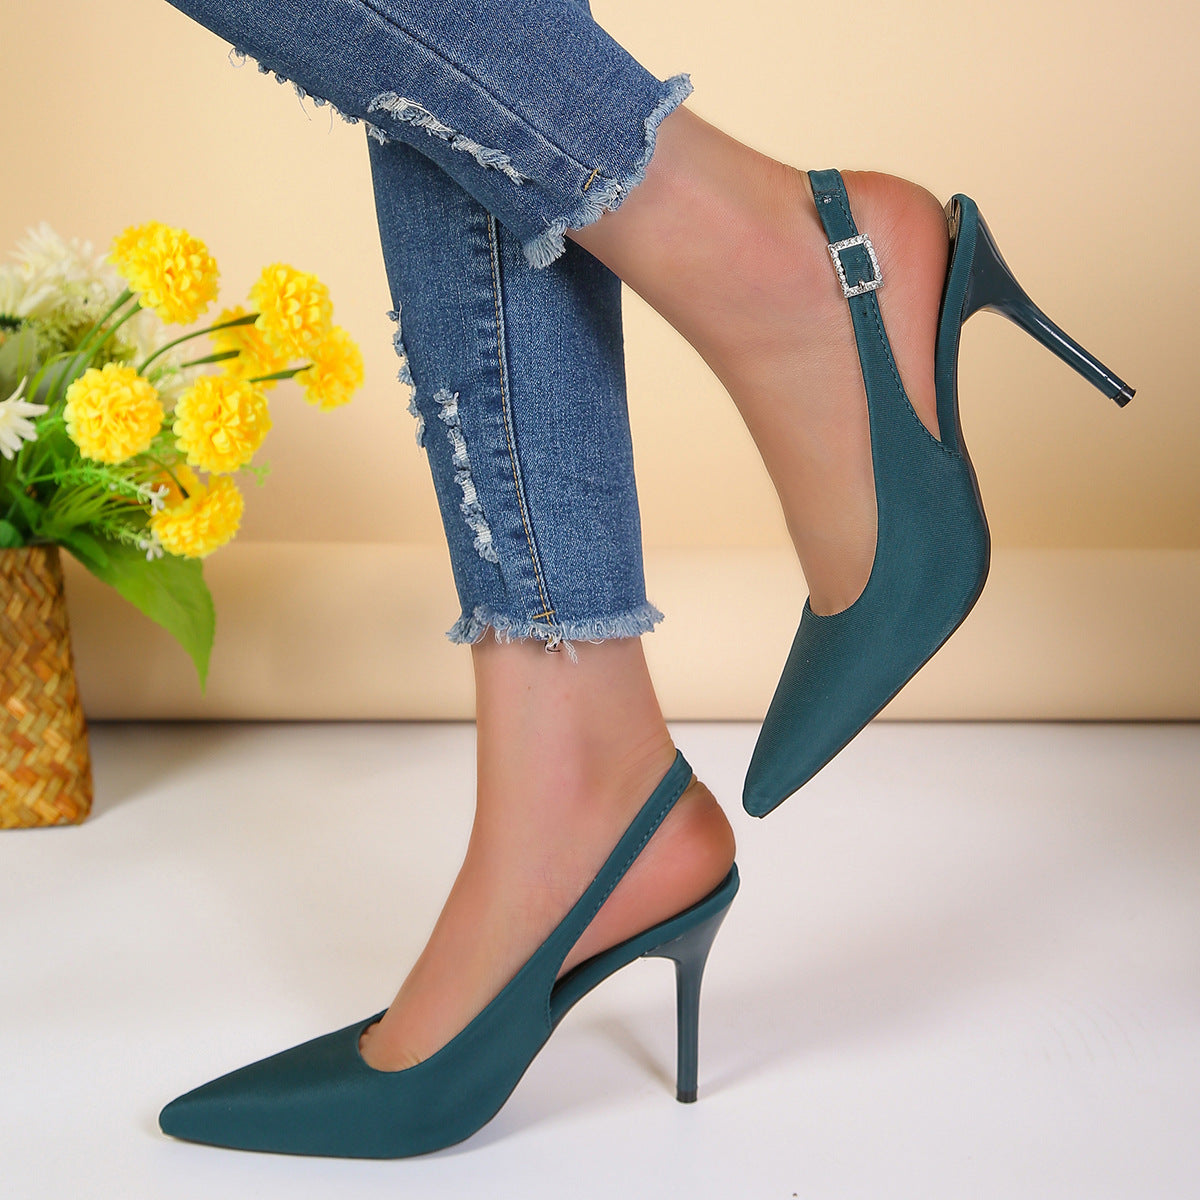 Pointed Toe Buckle Sandals Fashion Summer Stiletto High Heels Shoes For Women